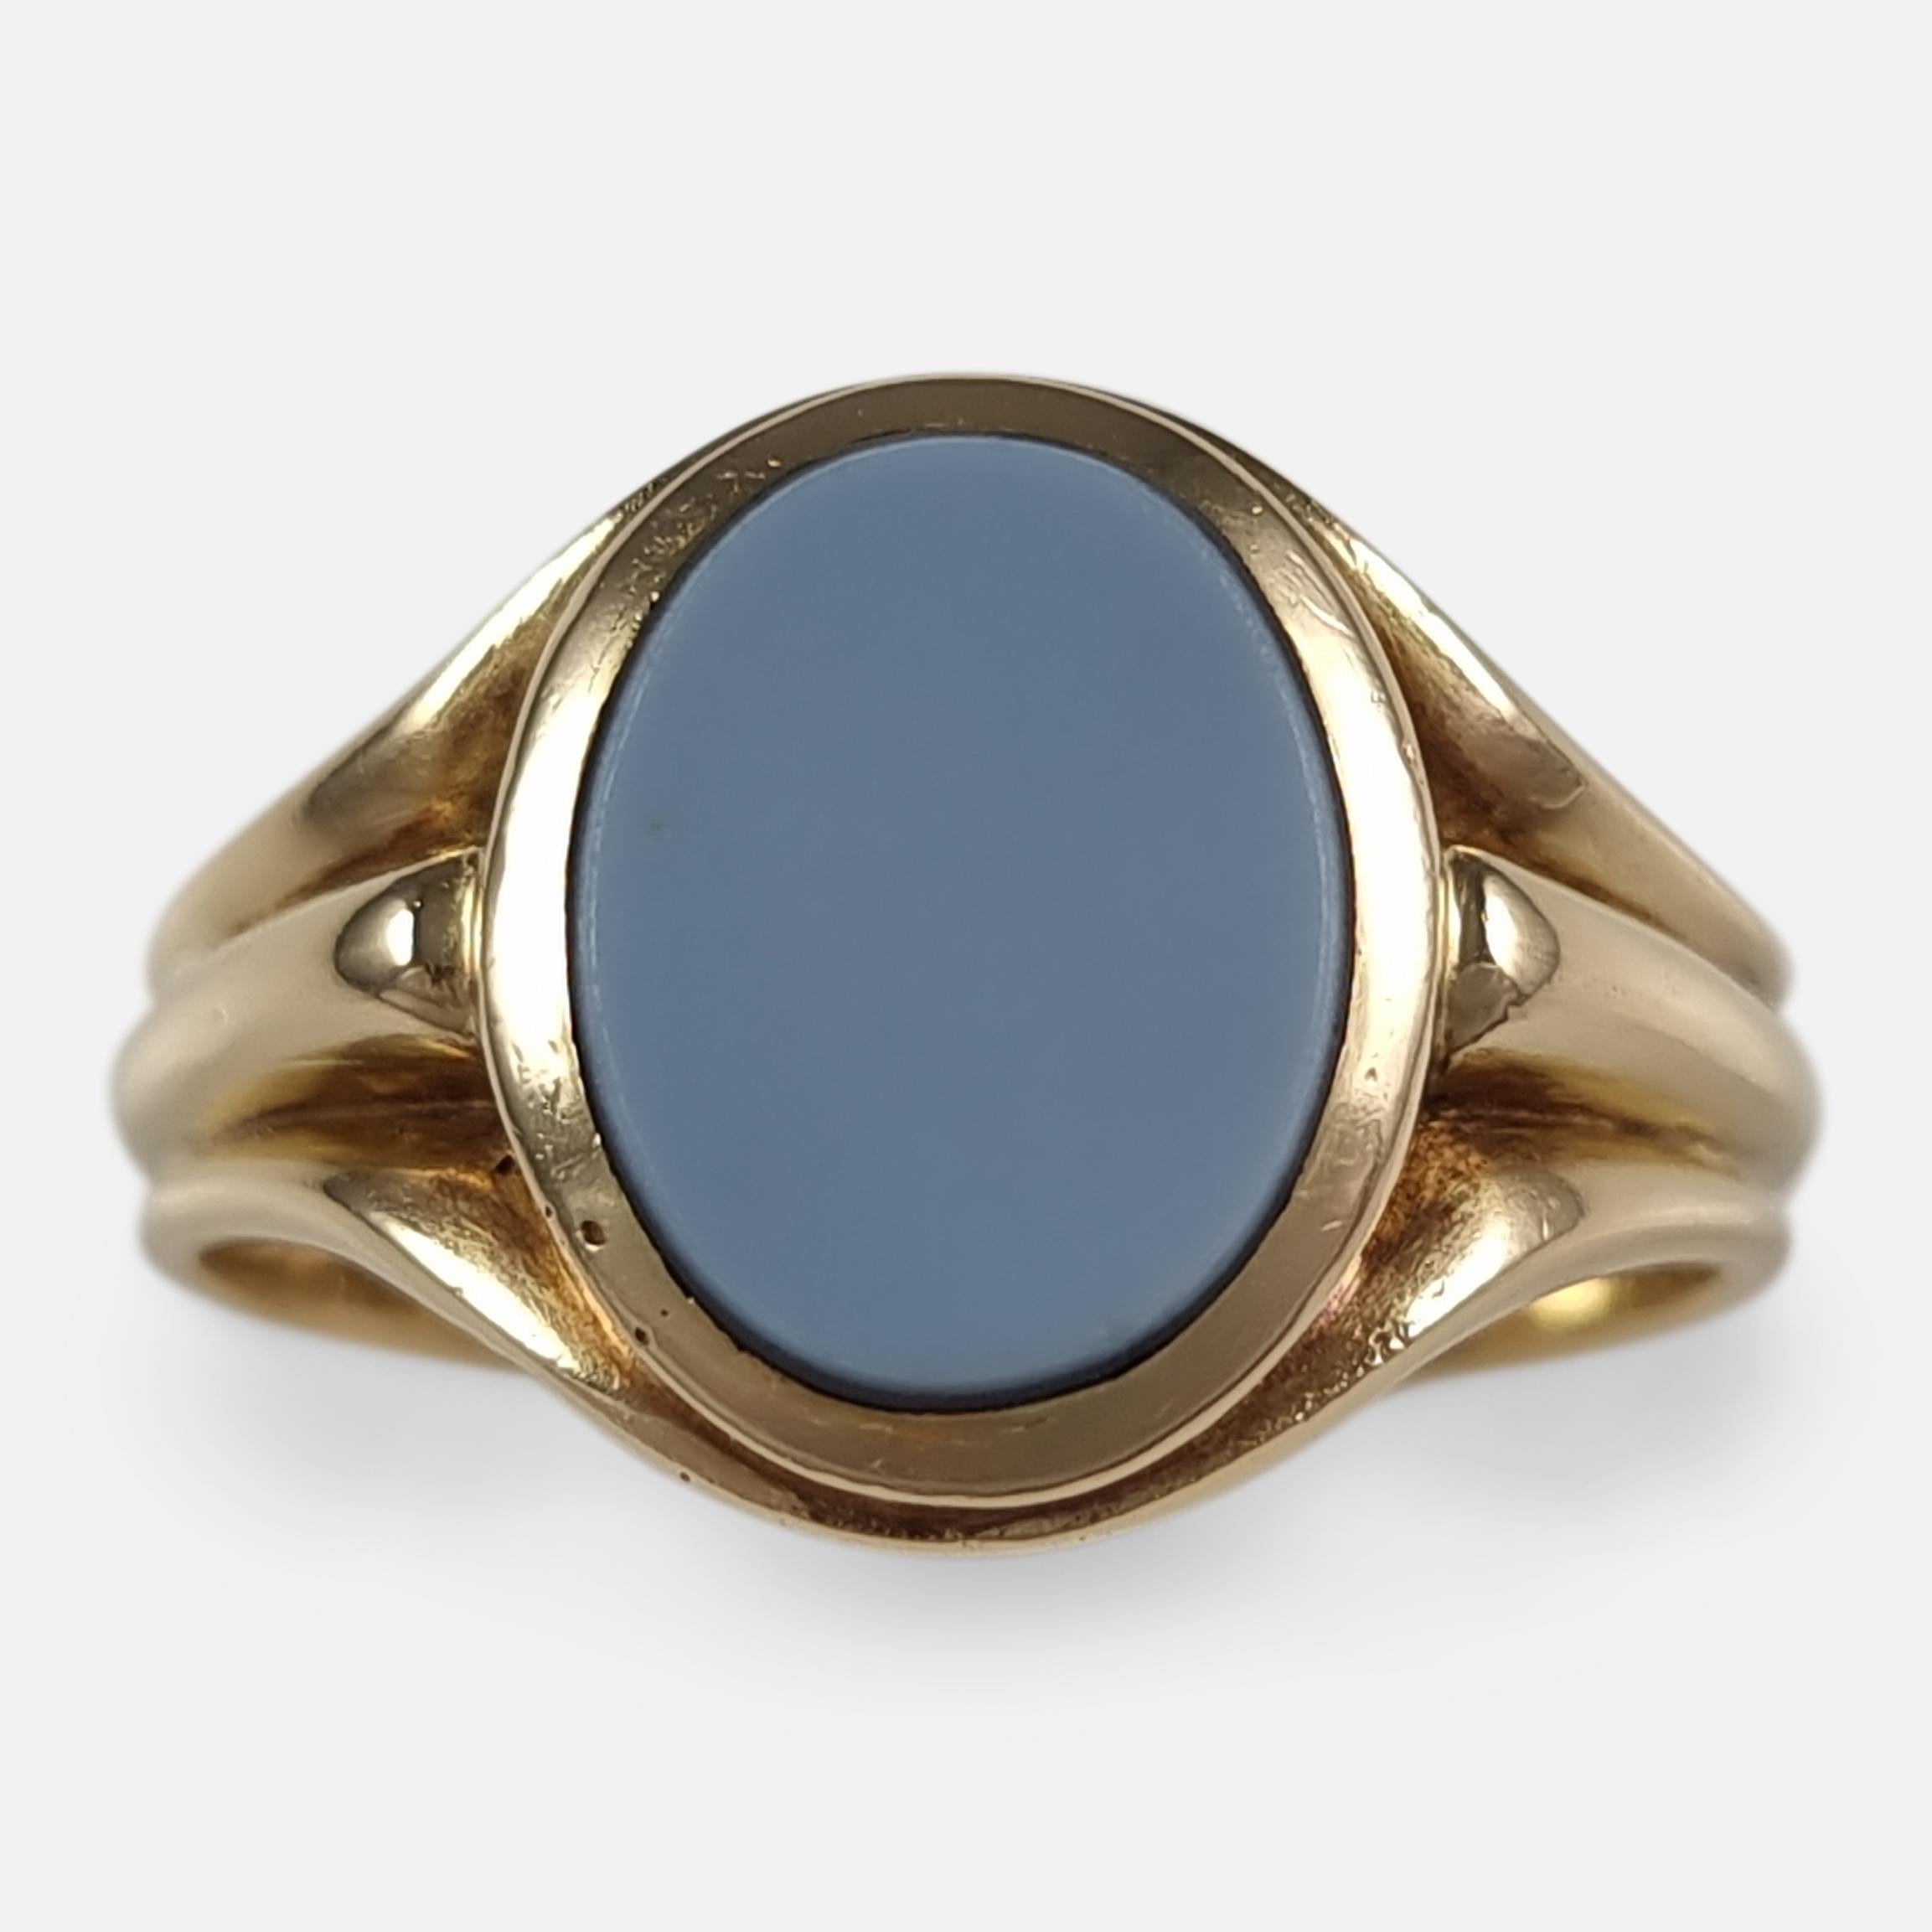 A George V 18ct yellow gold banded onyx signet ring. The signet ring is set with an oval banded onyx, which is grey and black in colour, leading to a reeded shank.

The ring is hallmarked with Birmingham assay office marks, the date letter 'n' to